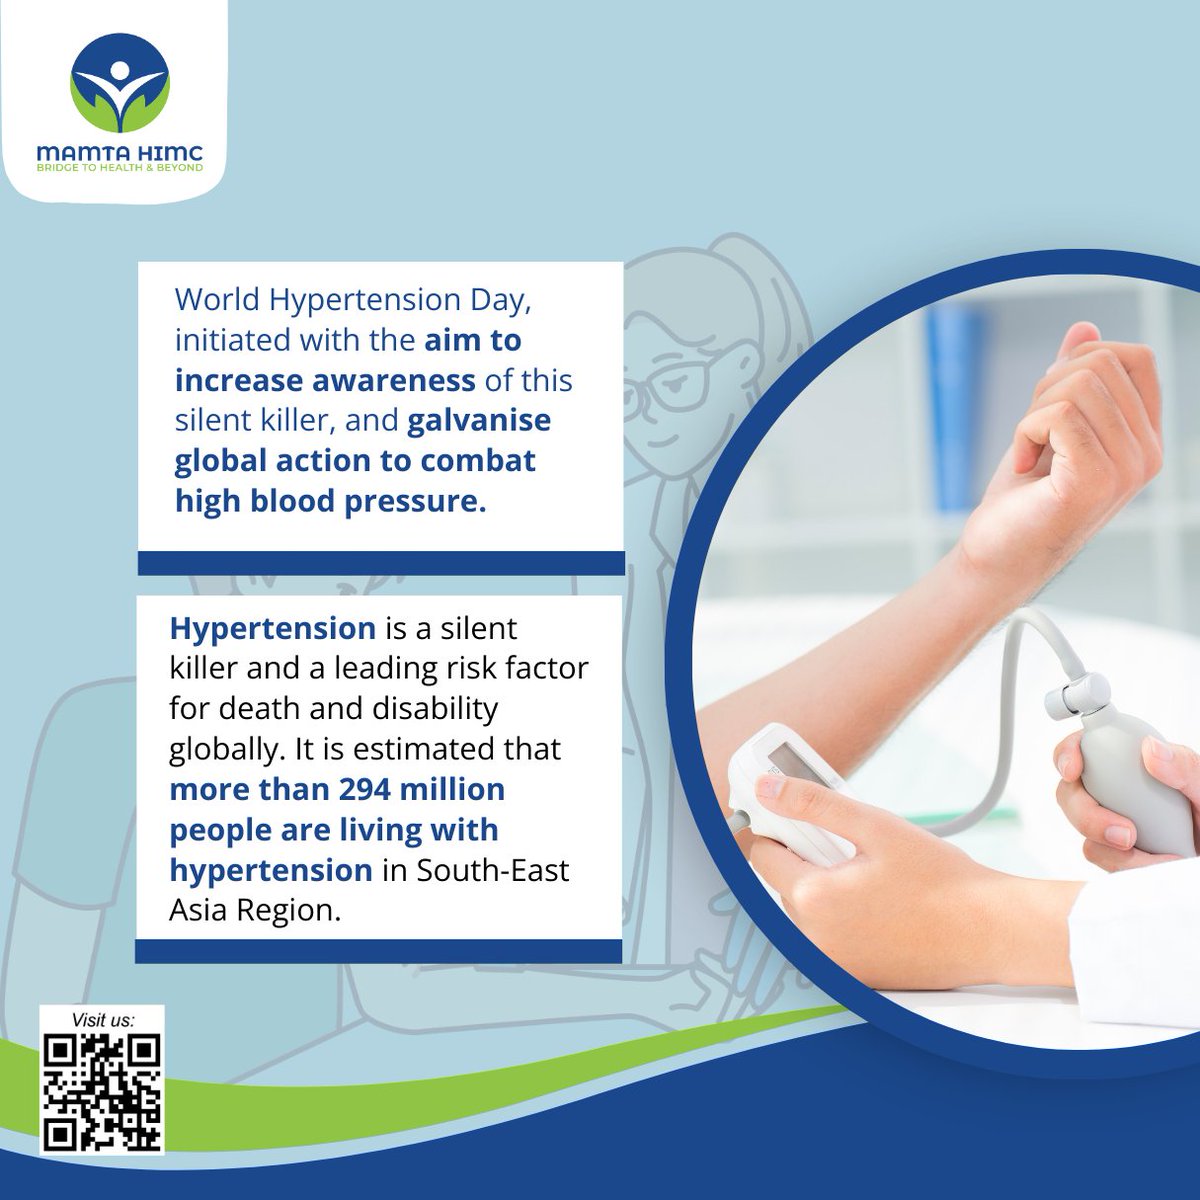 📢 Today we observe World #Hypertension Day, a global initiative to raise #awareness about #silentkiller high #bloodpressure. Uncontrolled hypertension can lead to severe #health issues like #heartattacks, #strokes, #kidney failure, and early death.
#MamtaHIMC